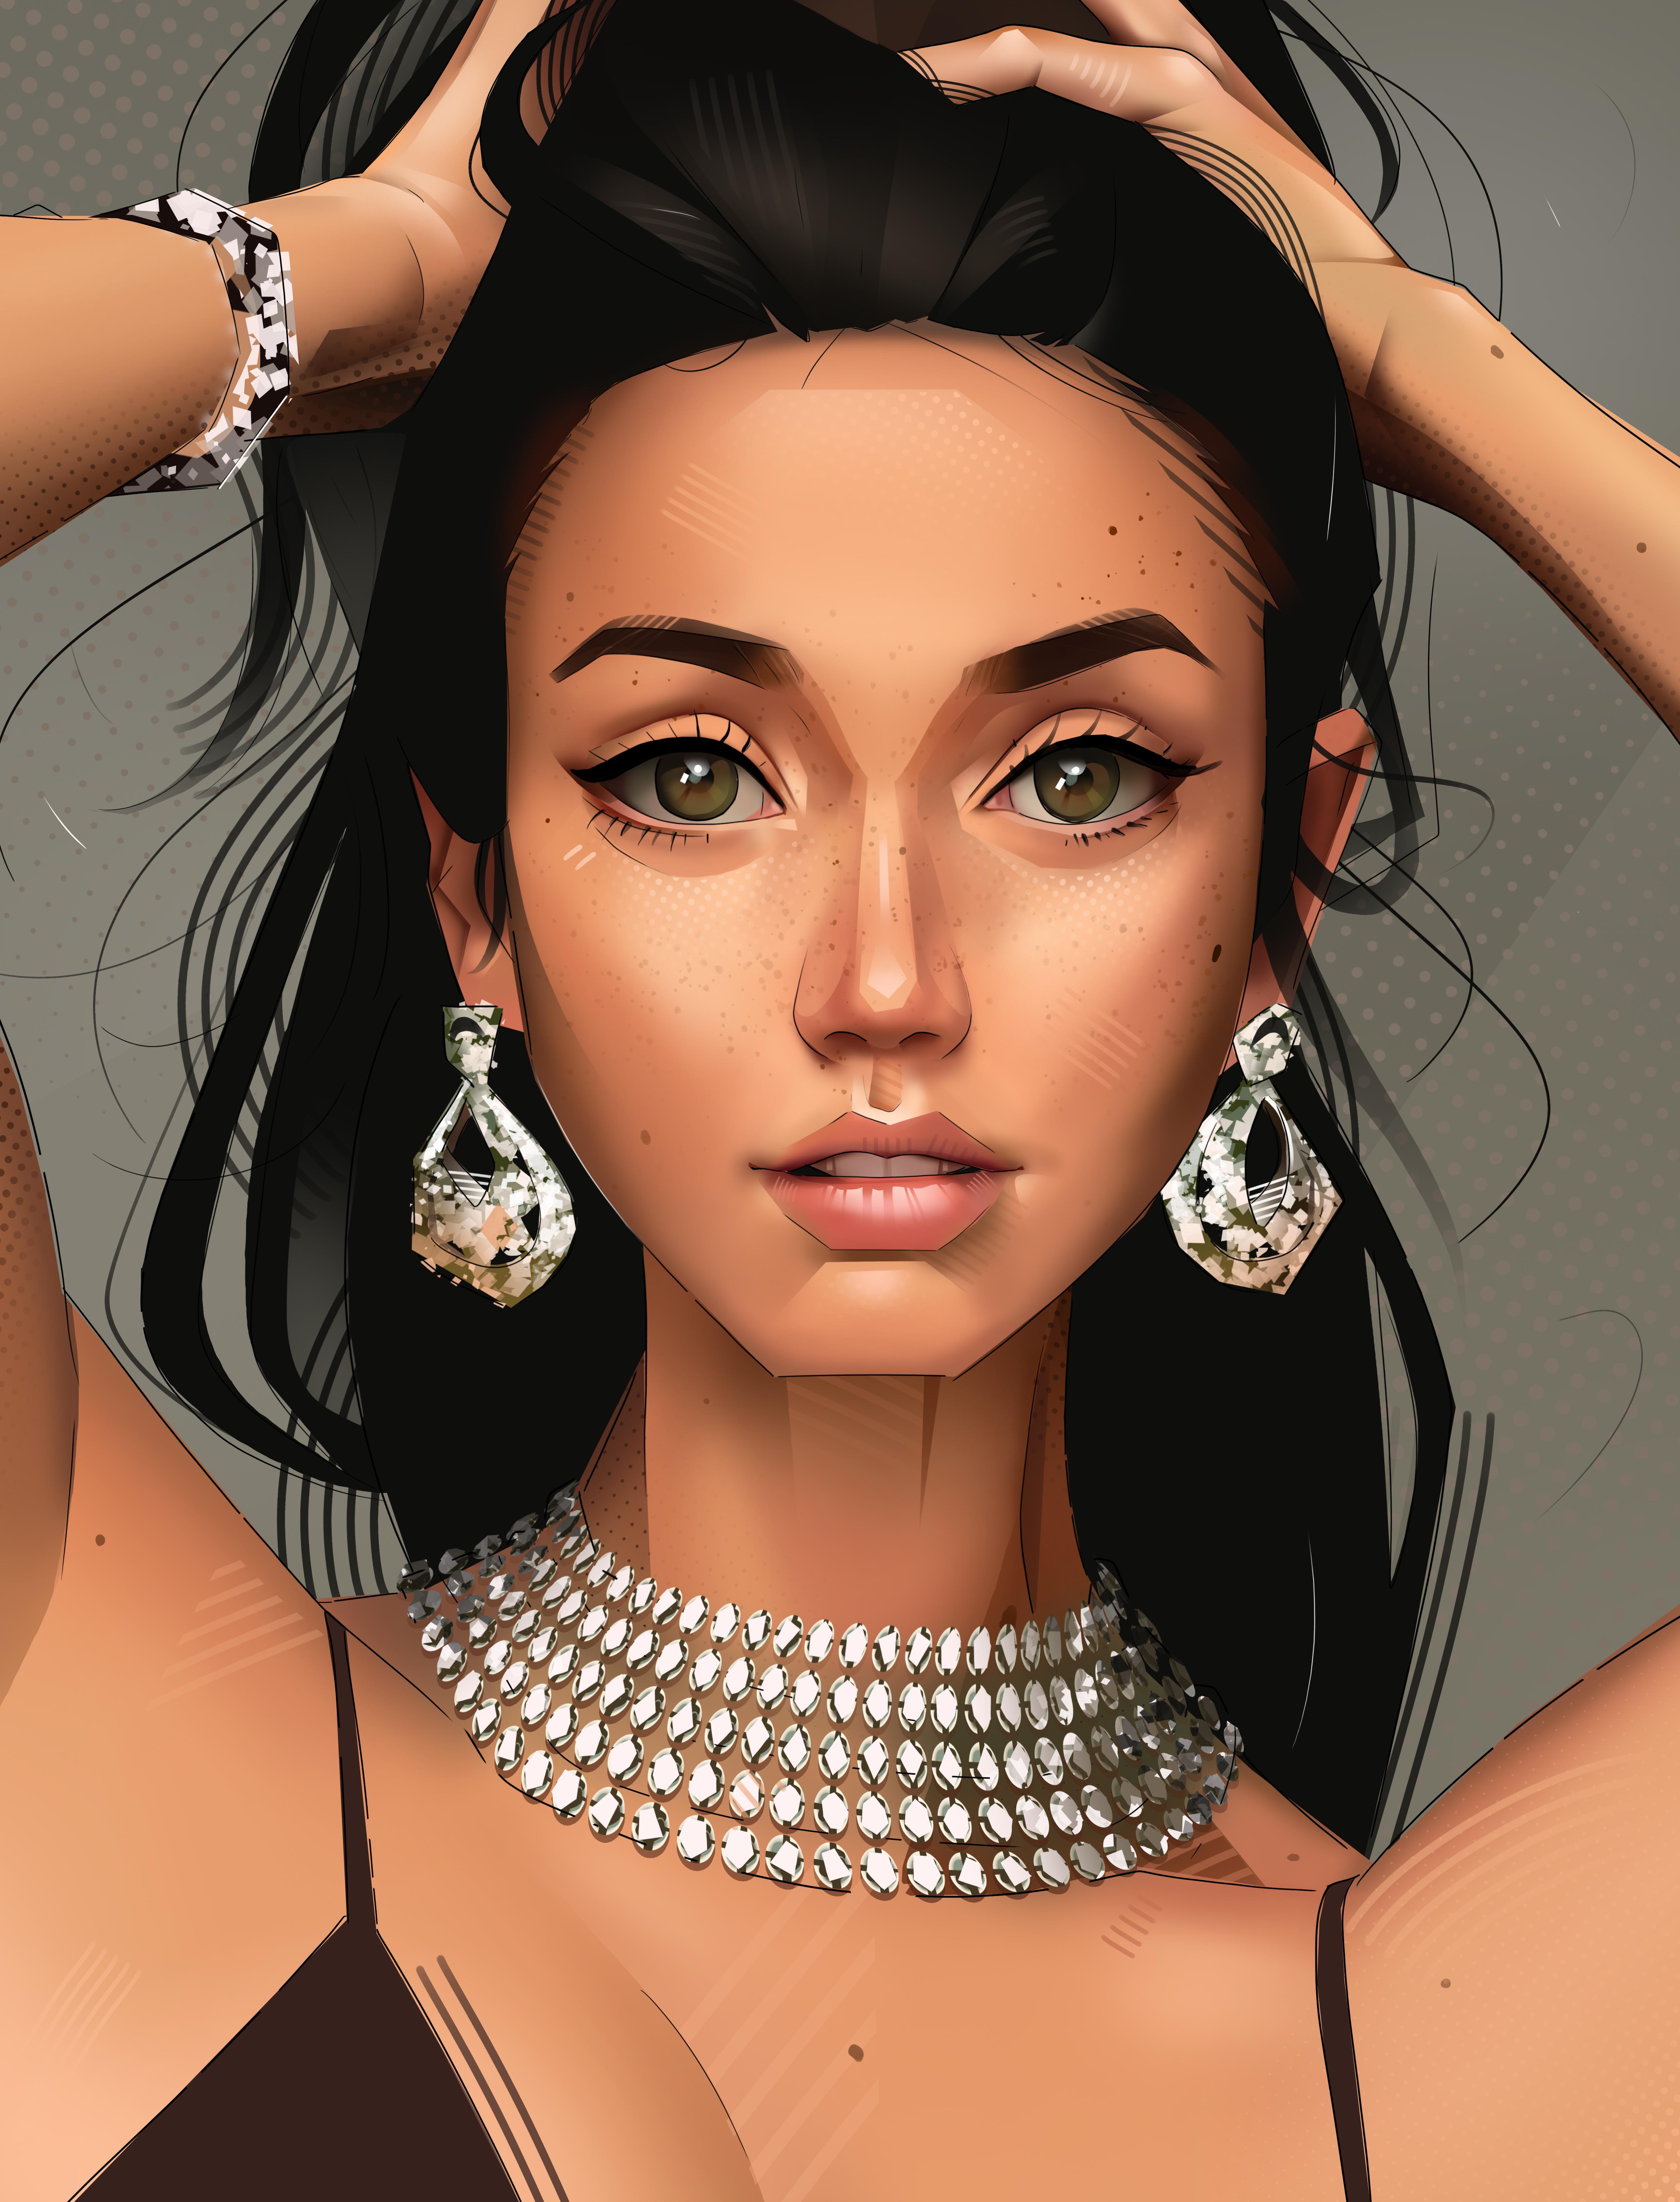 General 5000x6554 artwork hands in hair necklace diamond earrings Lilliepad97 digital art Ana de Armas women portrait display face parted lips black hair looking at viewer jewelry simple background earring